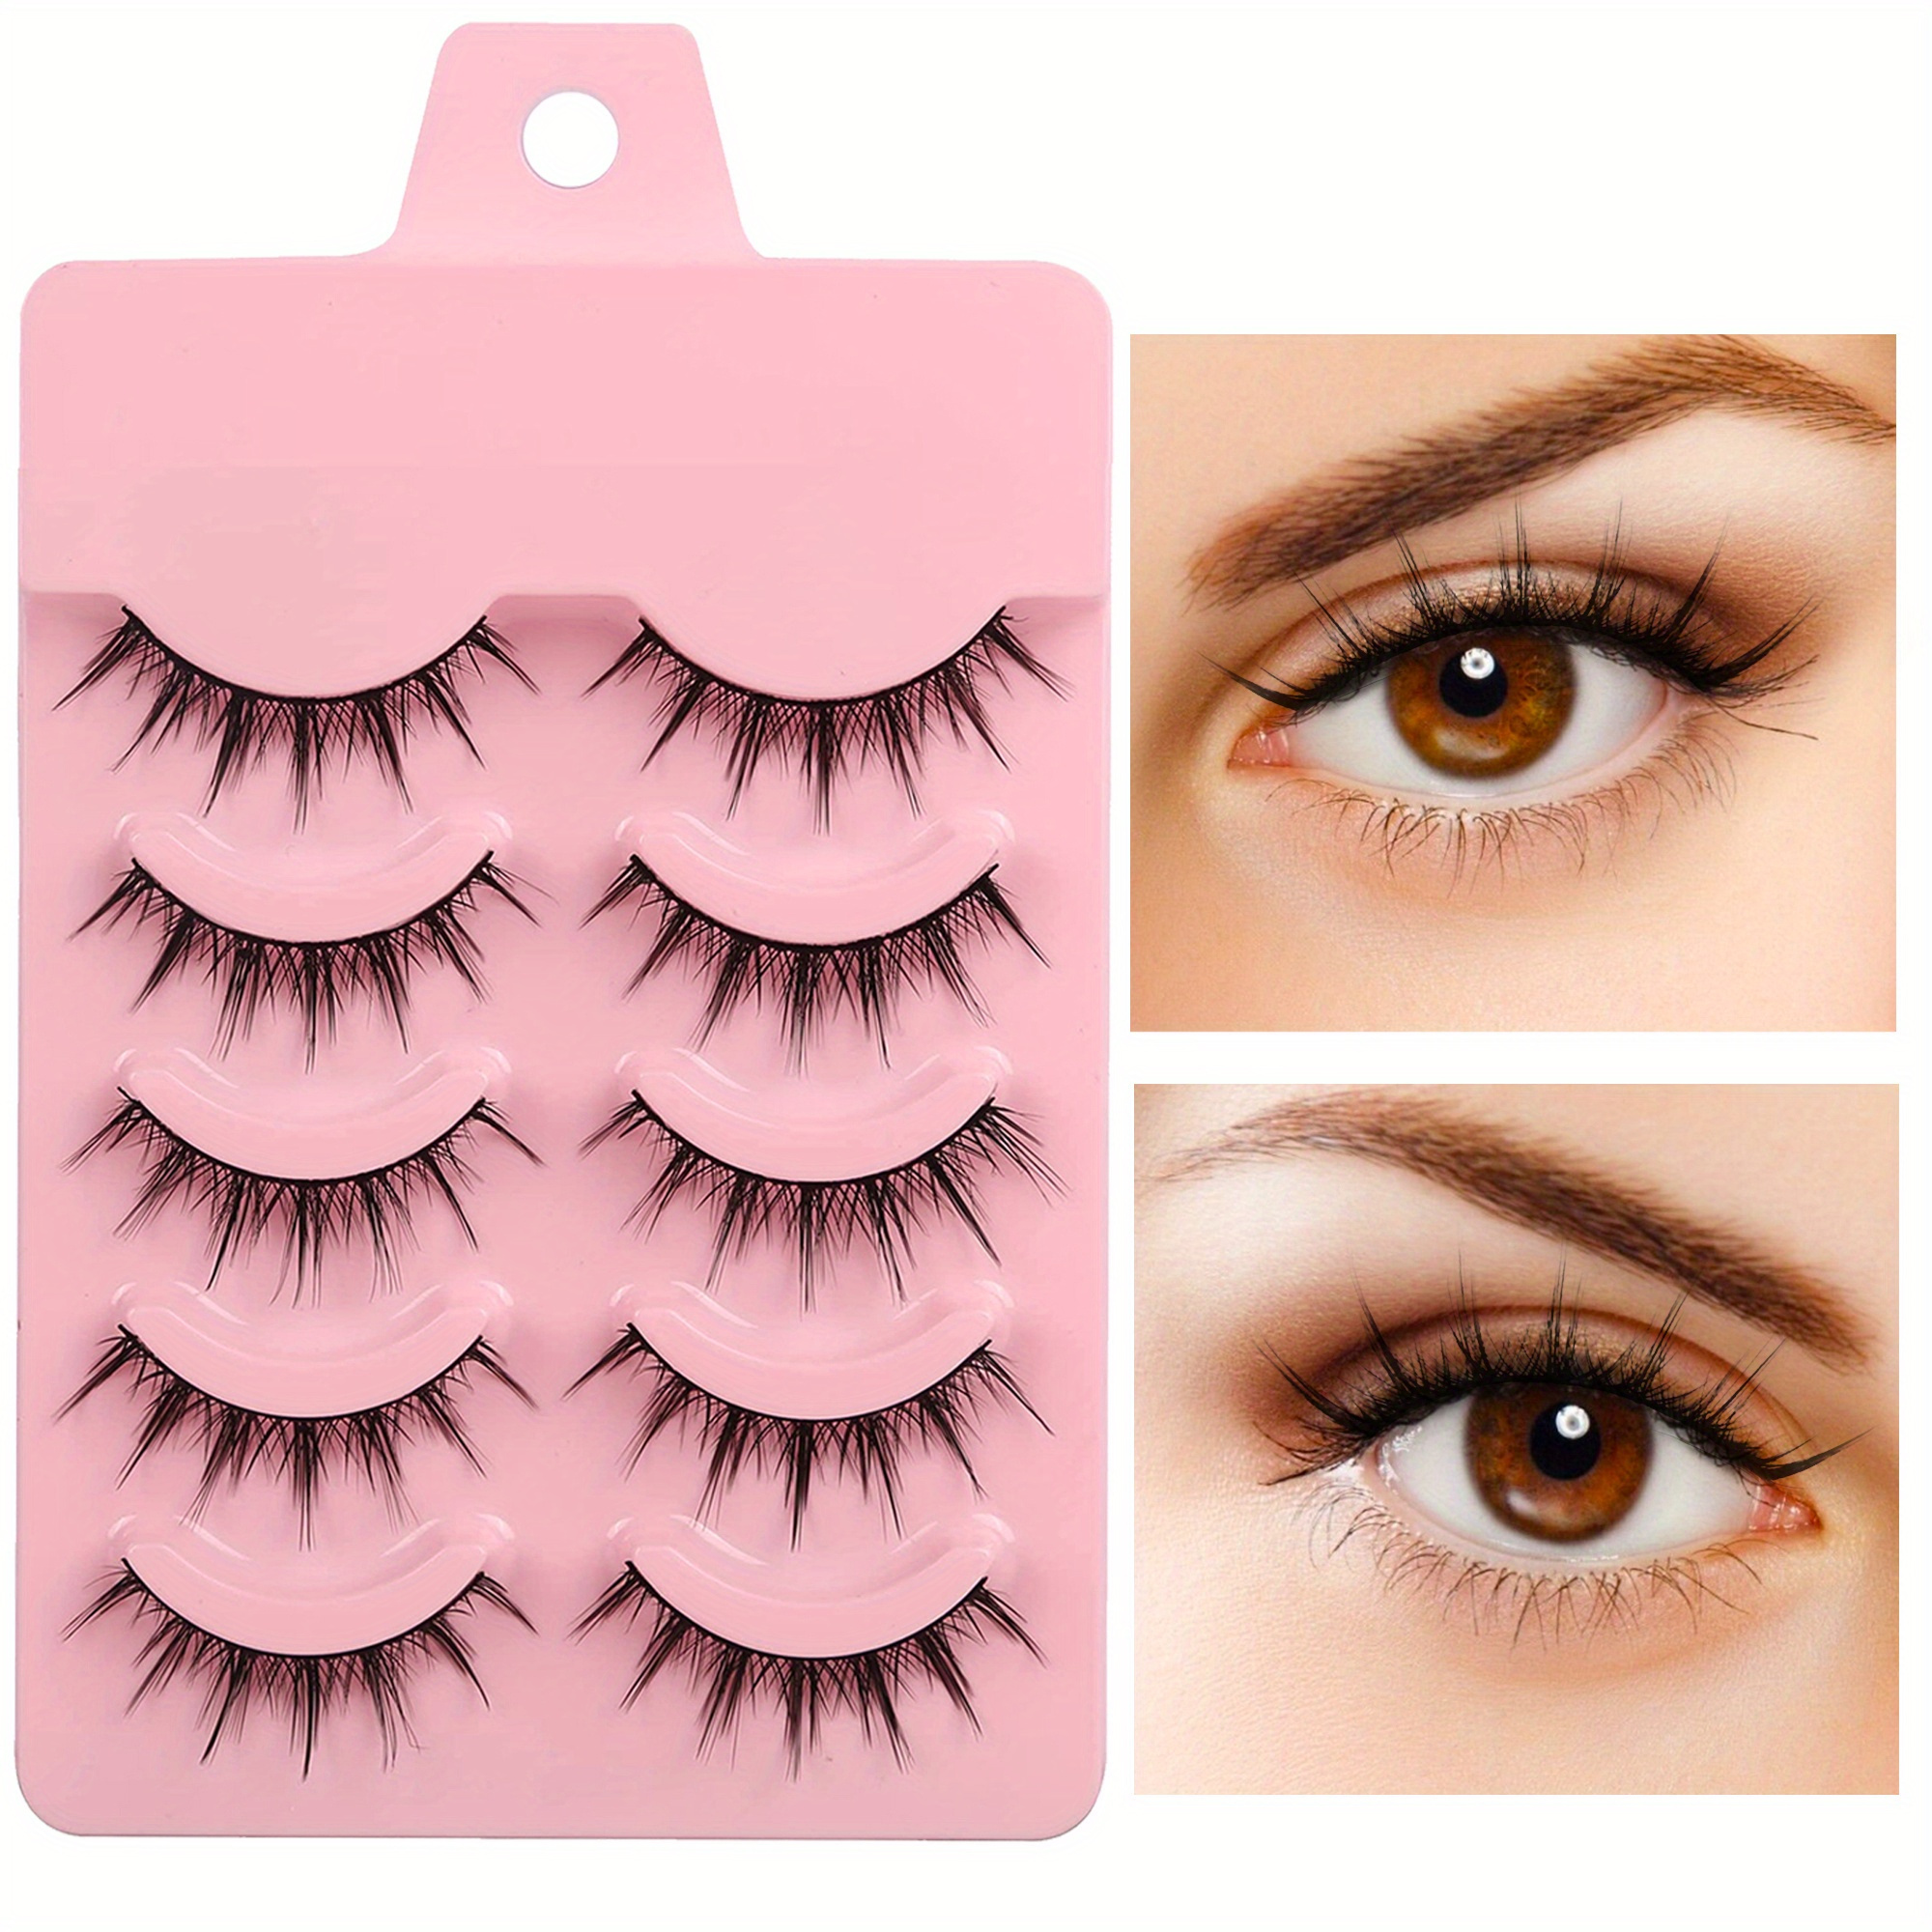 False Eyelashes 10 Pairs Manga Lashes Japanese Style Anime Thick Cosplay  Lashes Natural Look 16MM Spiky 8D Wispy Faux Mink Lashes Full Strip Doll